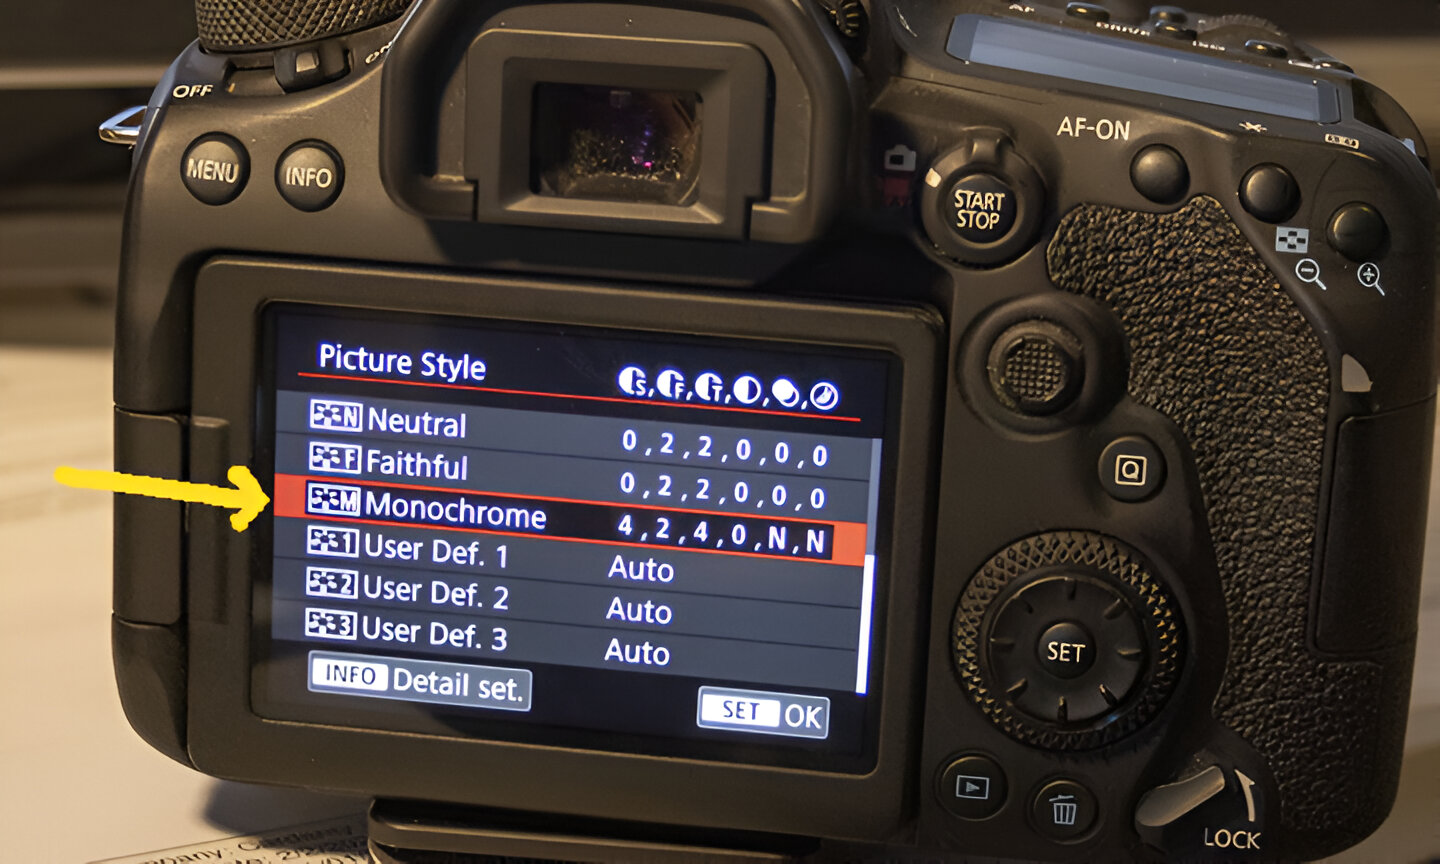 How To Turn On The B&W Function On My Canon EOS DSLR Camera